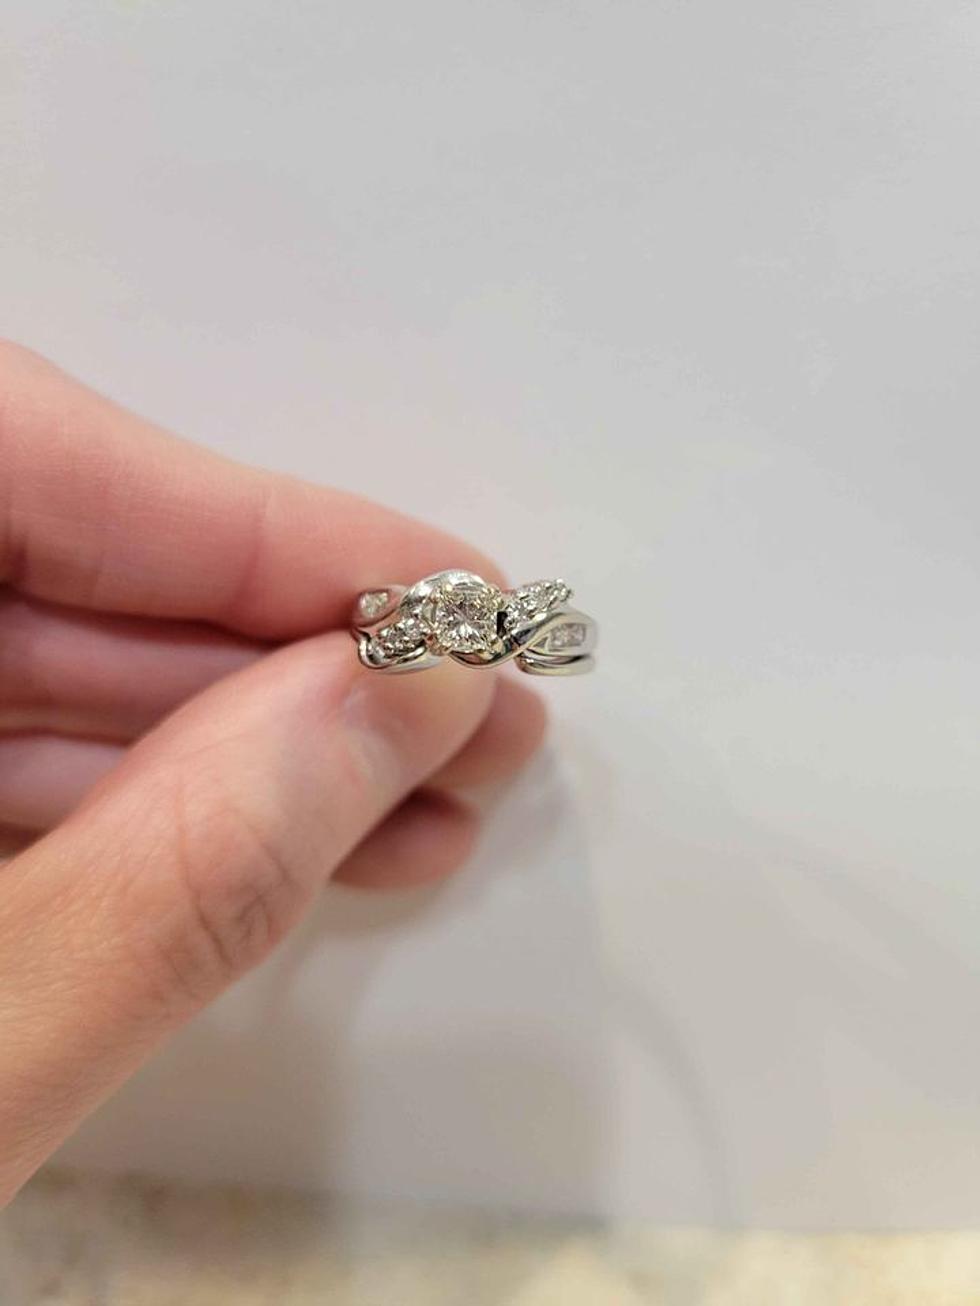 Woman Selling &#8216;Totally Not Cursed&#8217; Engagement Ring on Facebook